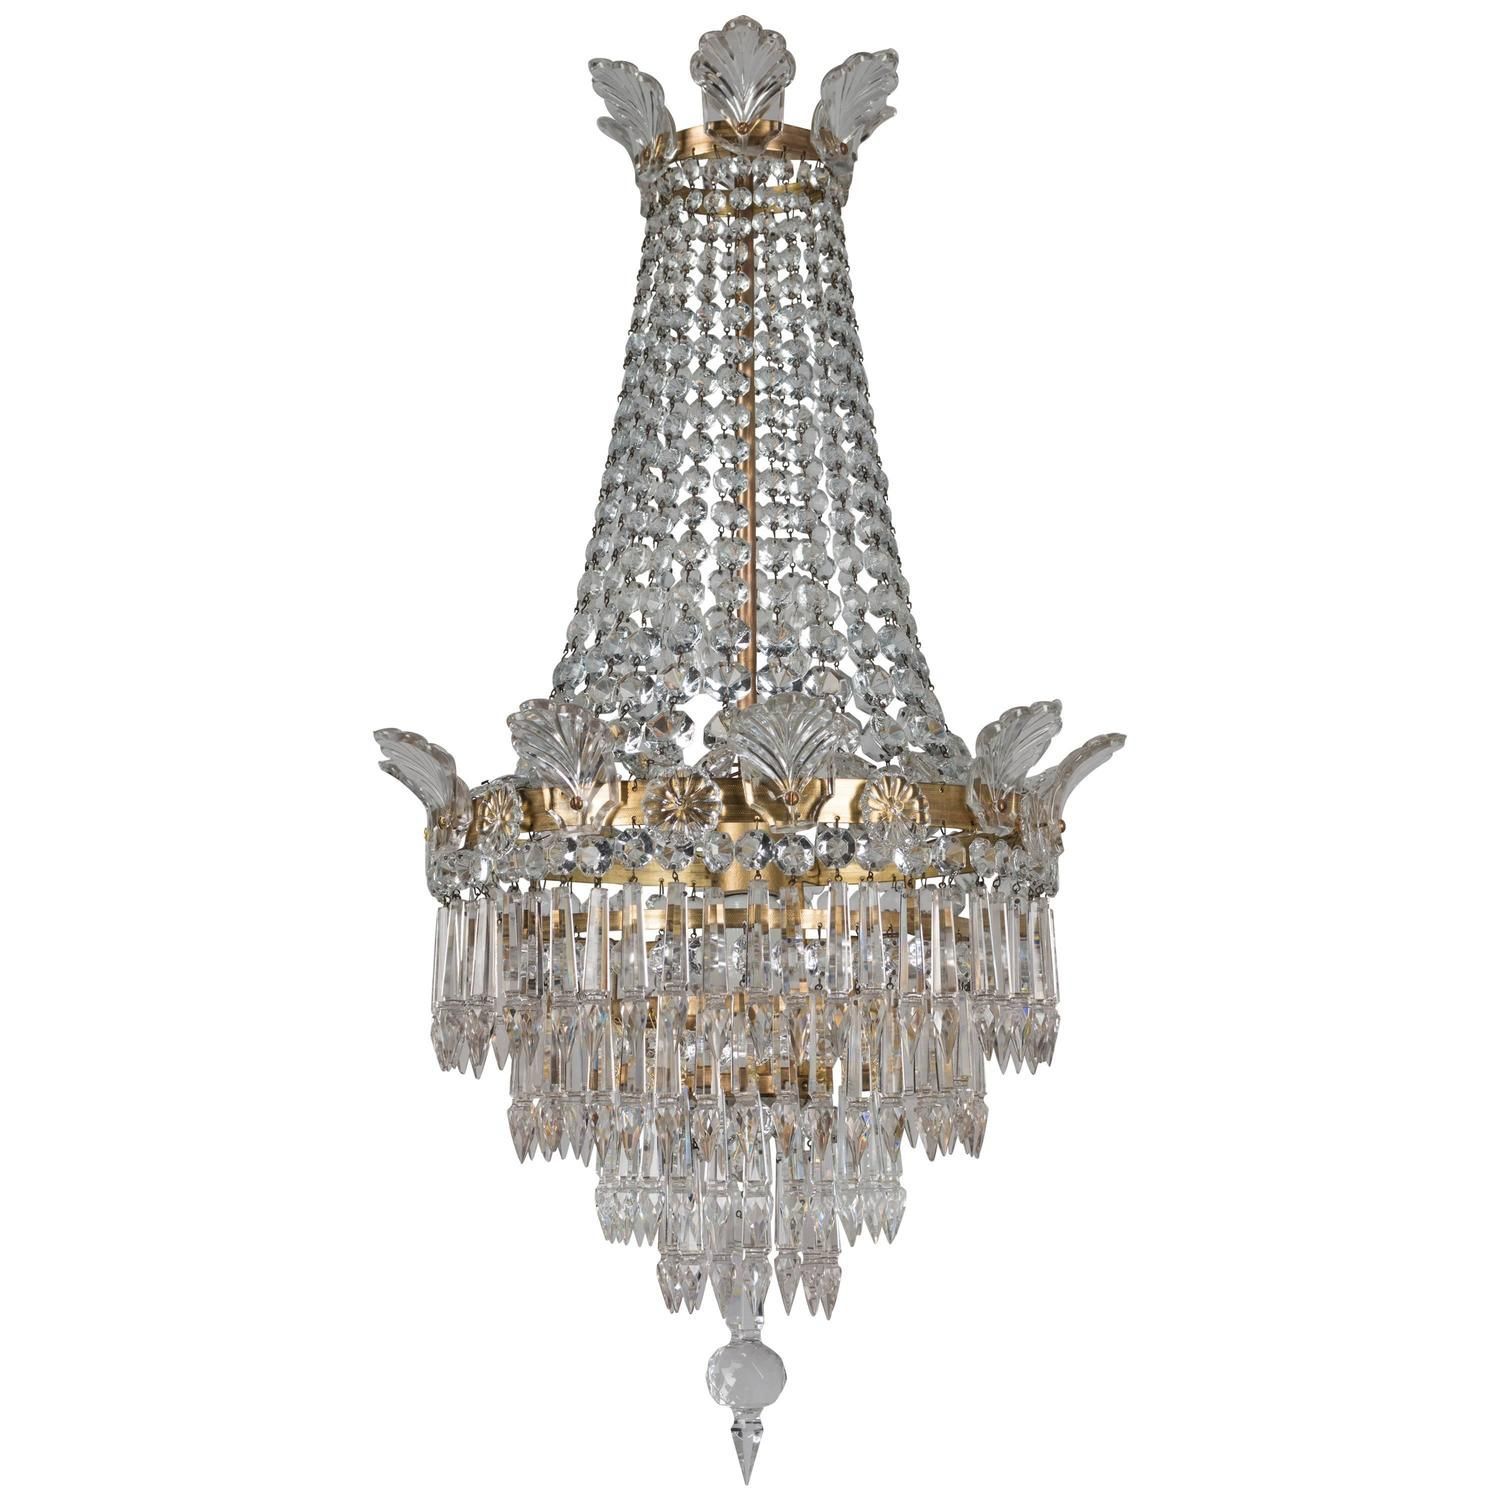 French Empire Style Crystal Chandelier | Crystal Throughout Roman Bronze And Crystal Chandeliers (View 5 of 15)